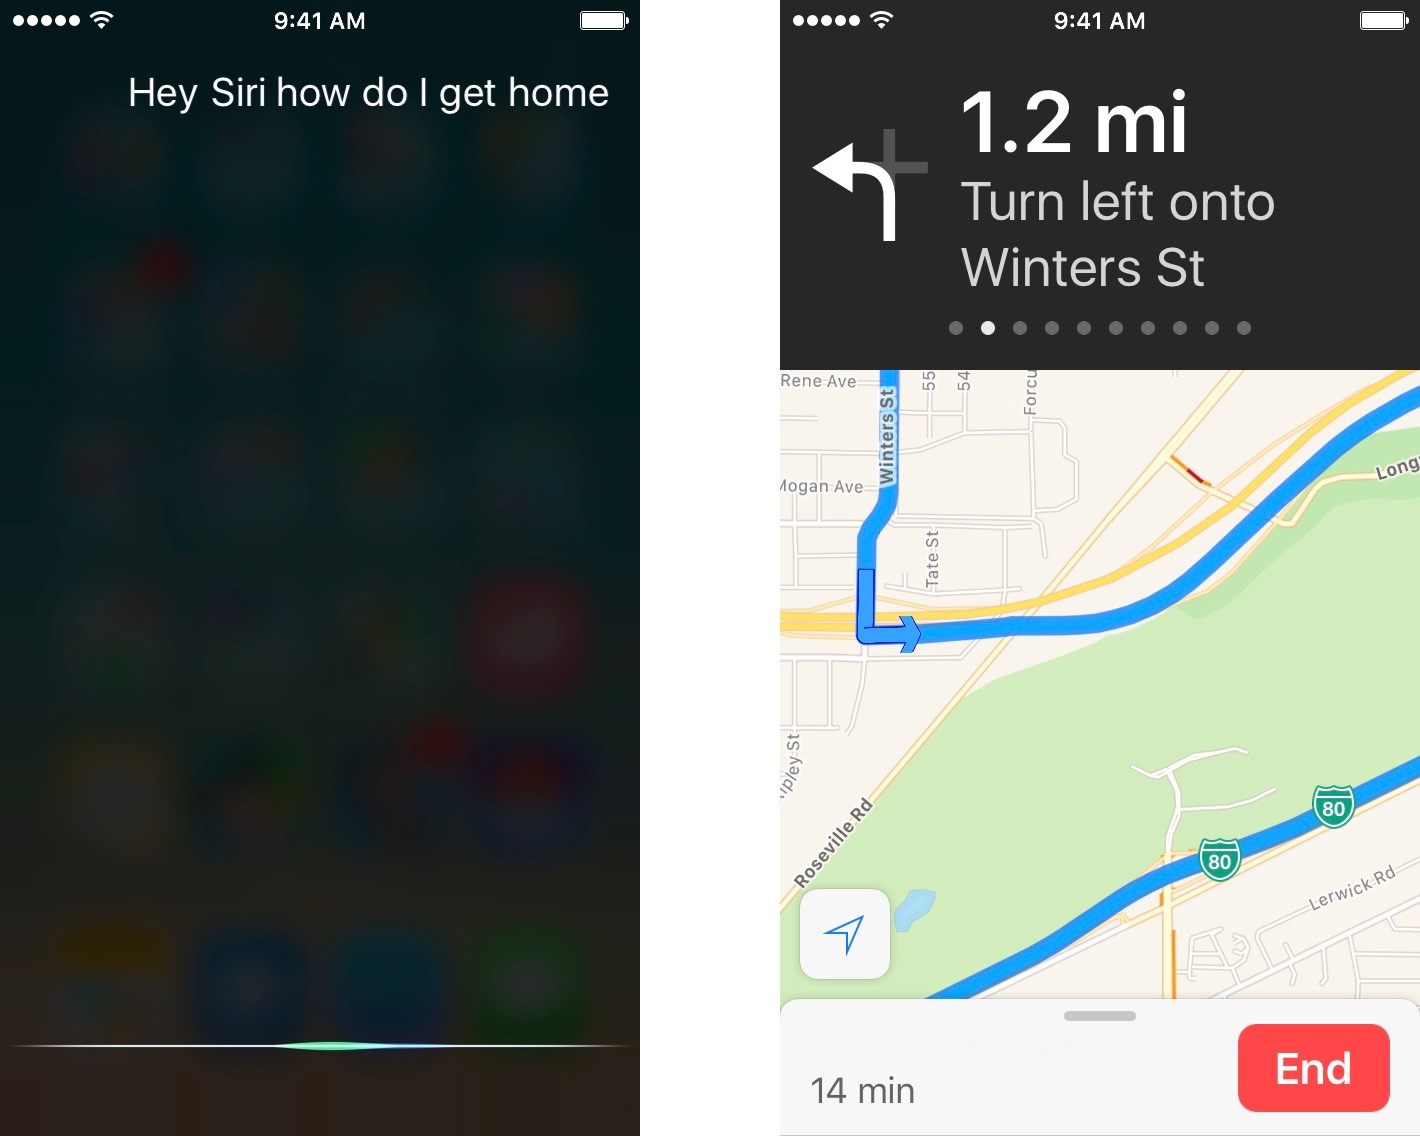 Ask Siri how to get home